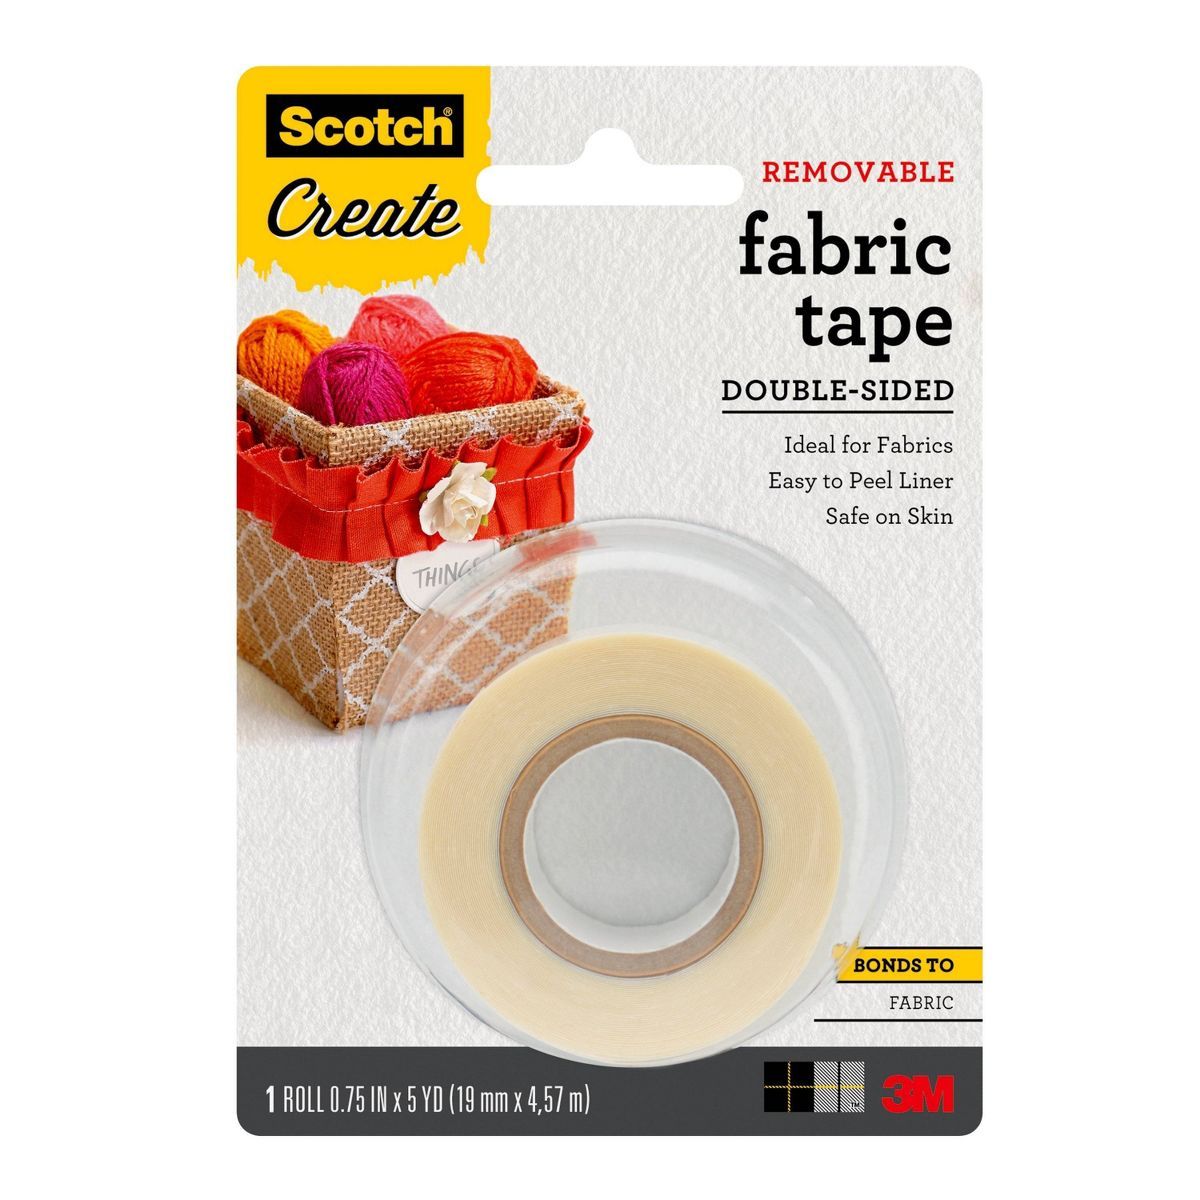 Scotch Create Removable Double-Sided Fabric Tape | Target